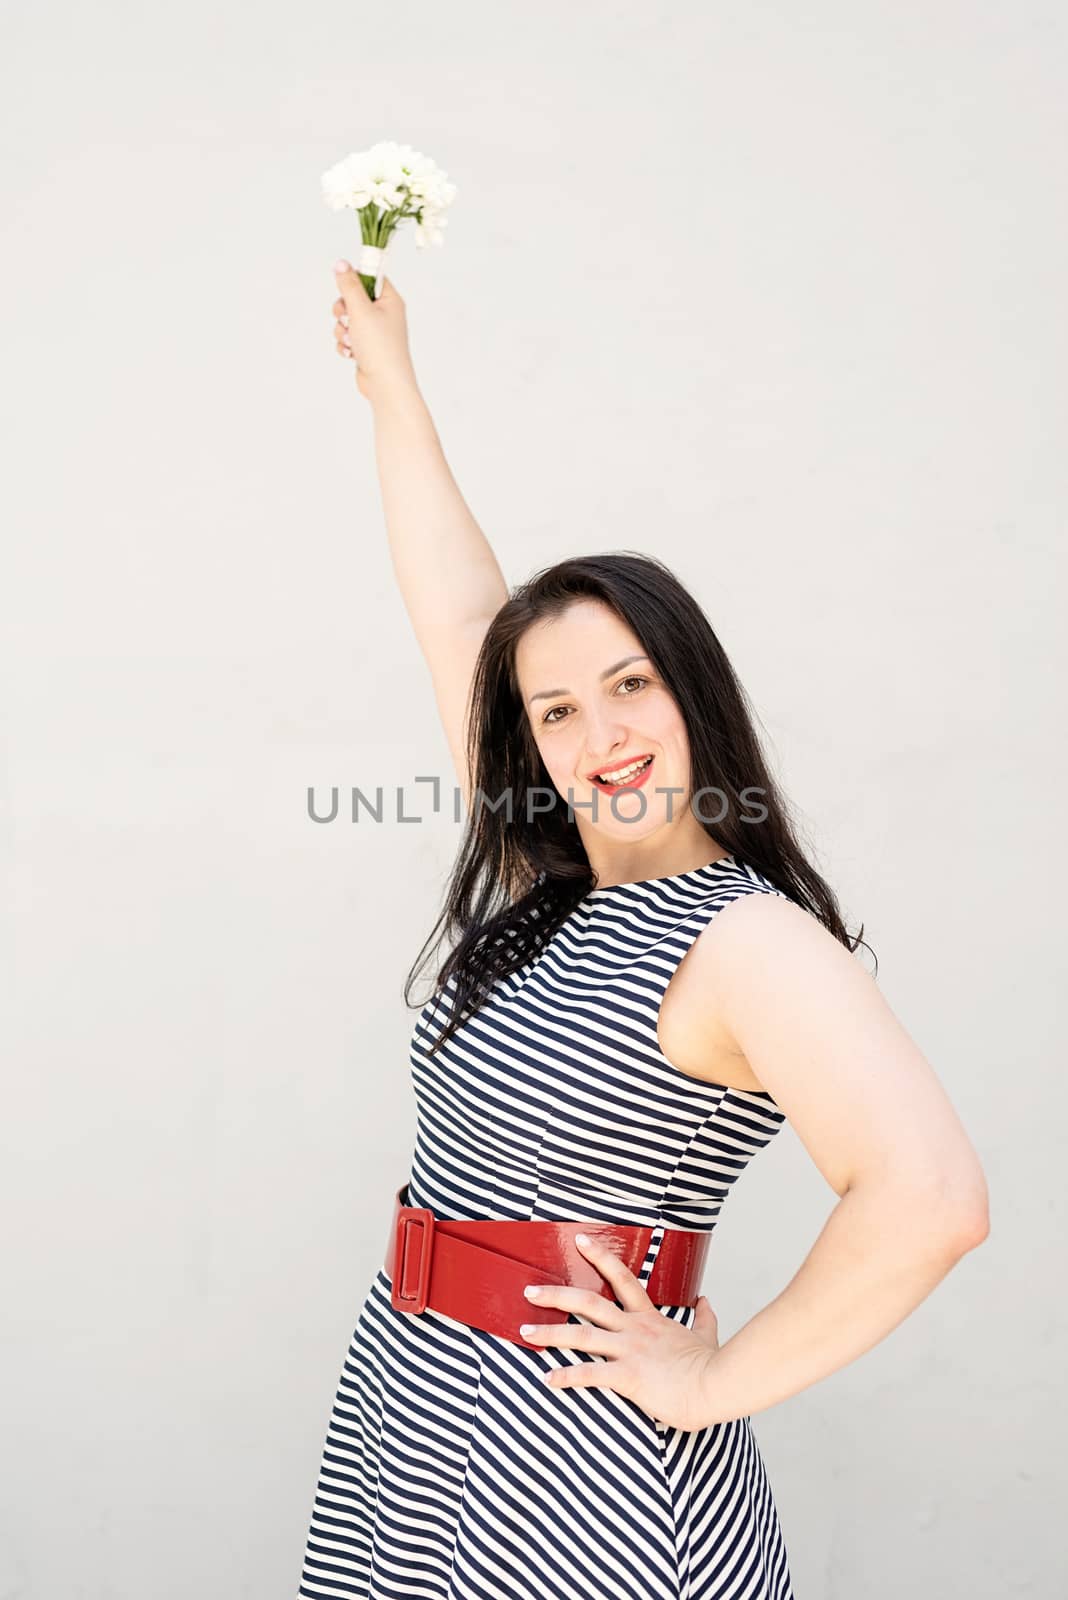 Happy young woman holding a bouquet of flowers in a raised hand on a gray solid background by Desperada